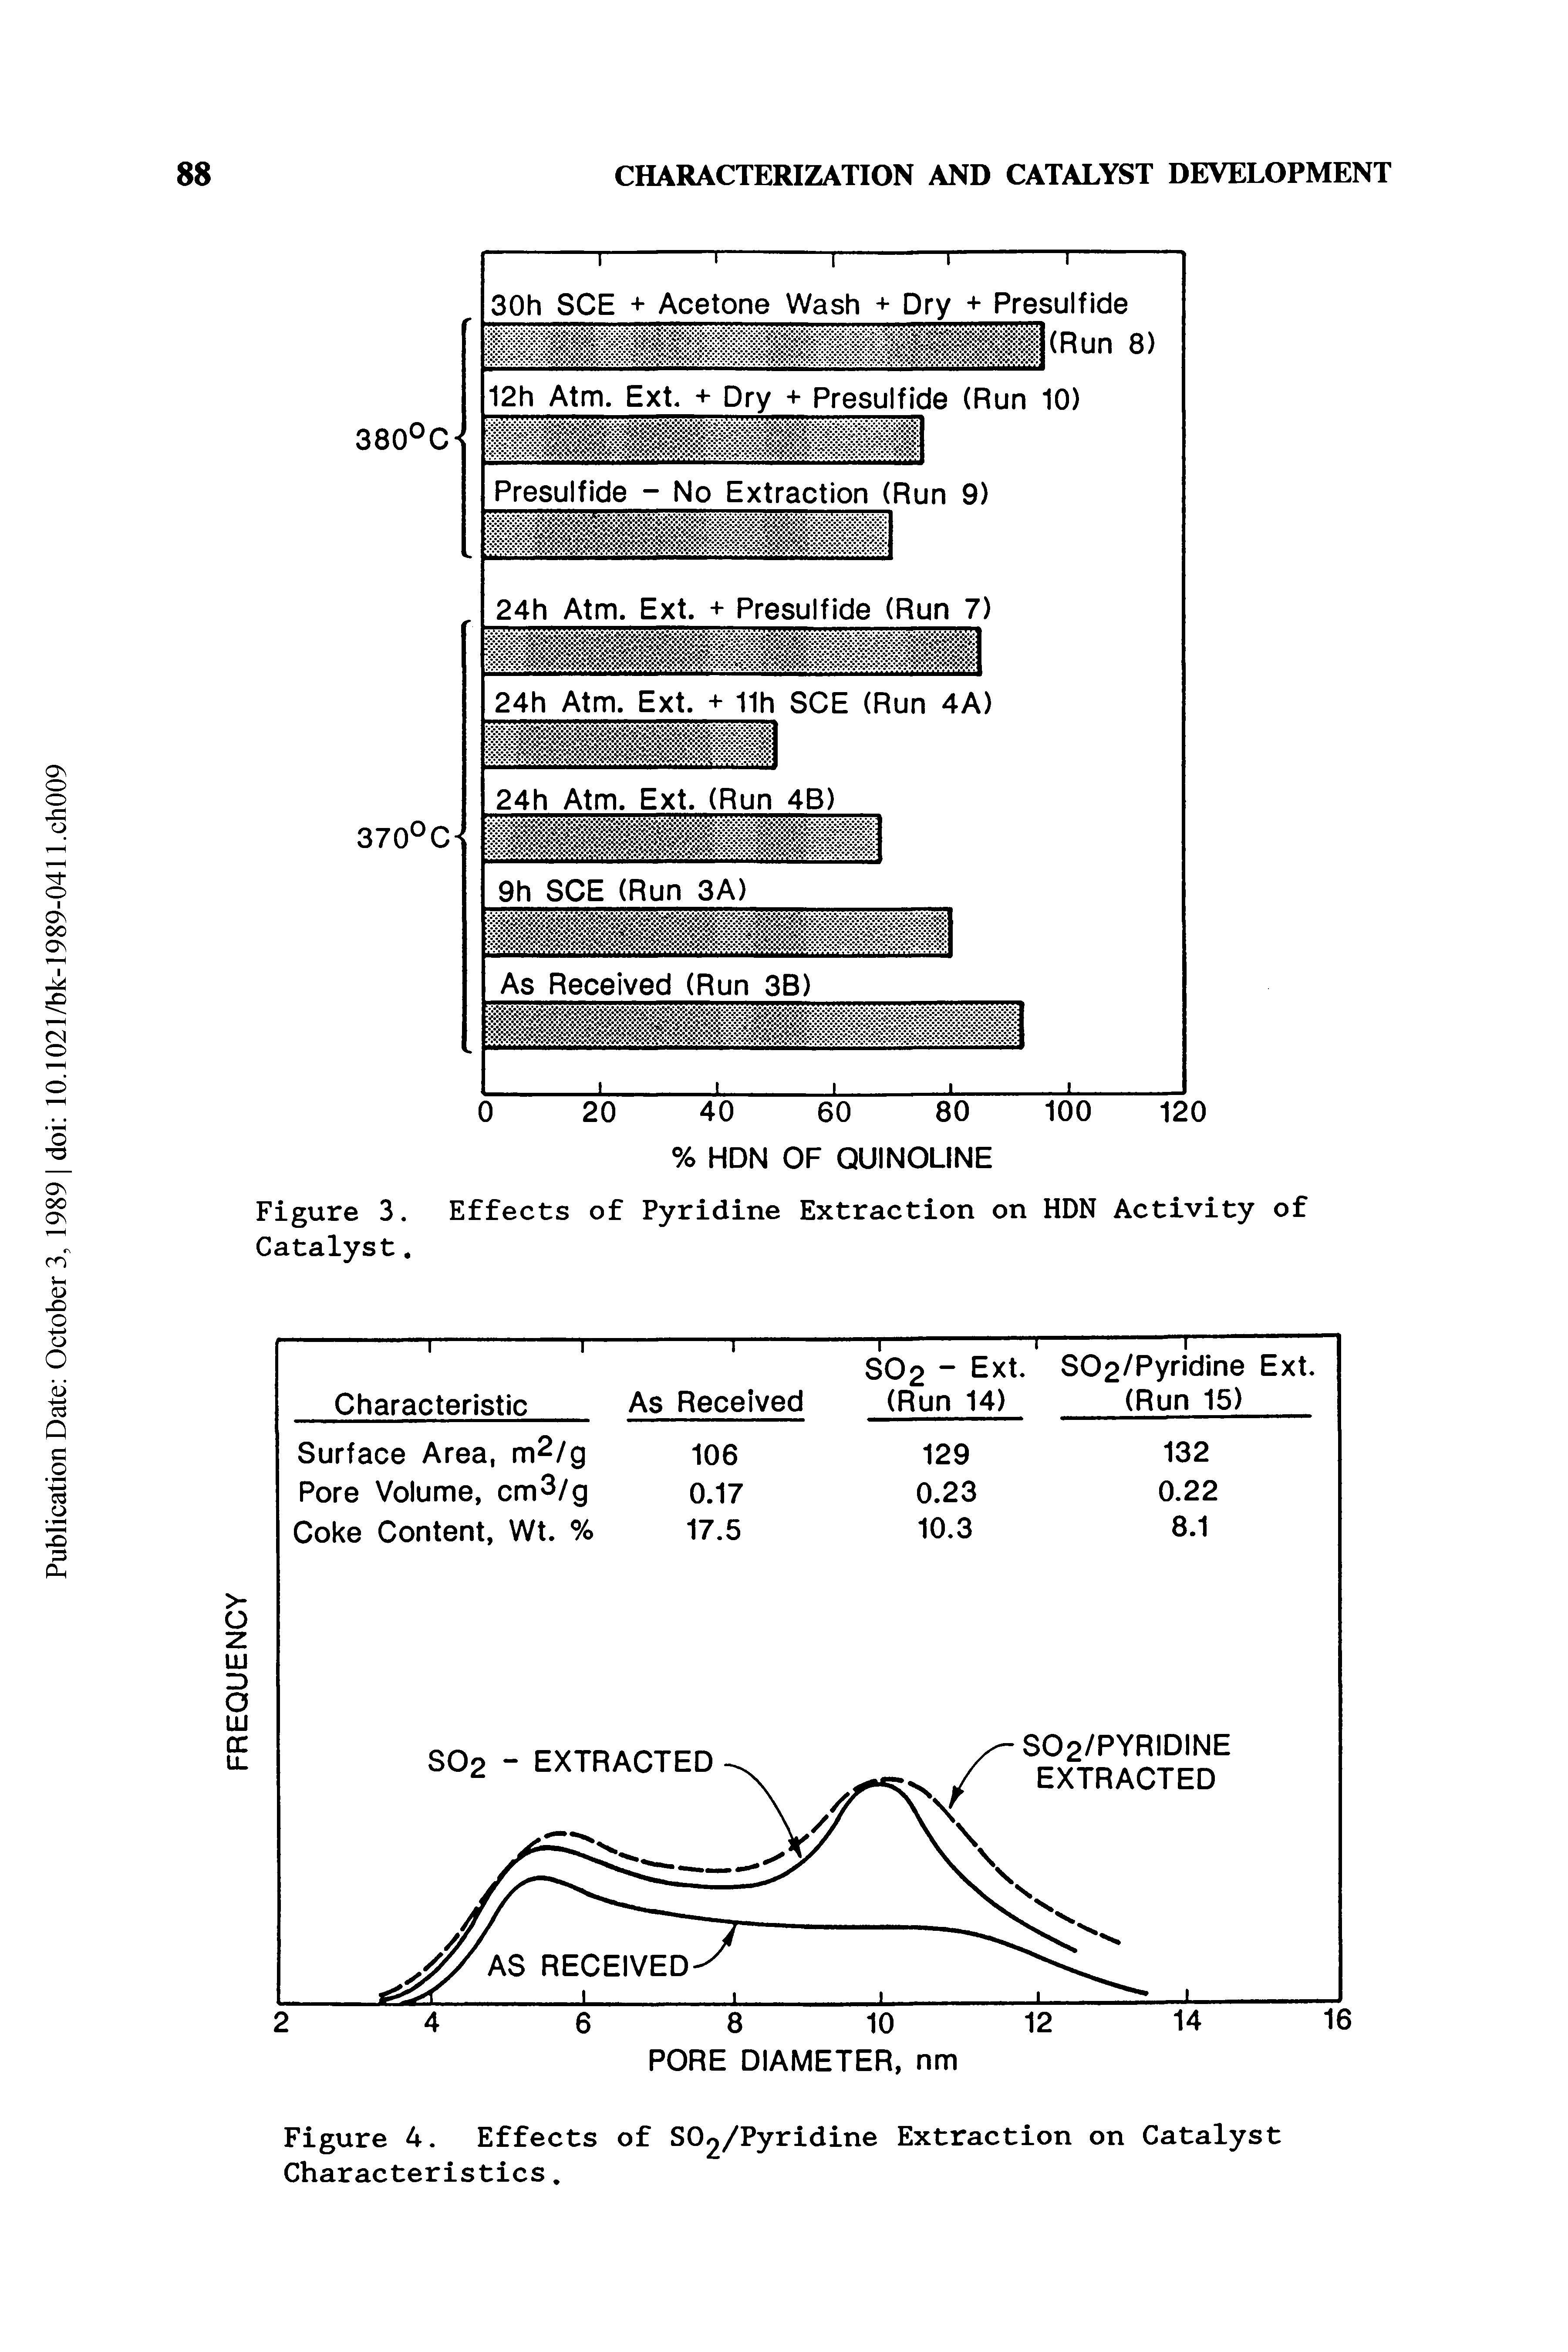 Figure 4. Effects of SC /Pyridine Extraction on Catalyst Characteristics.